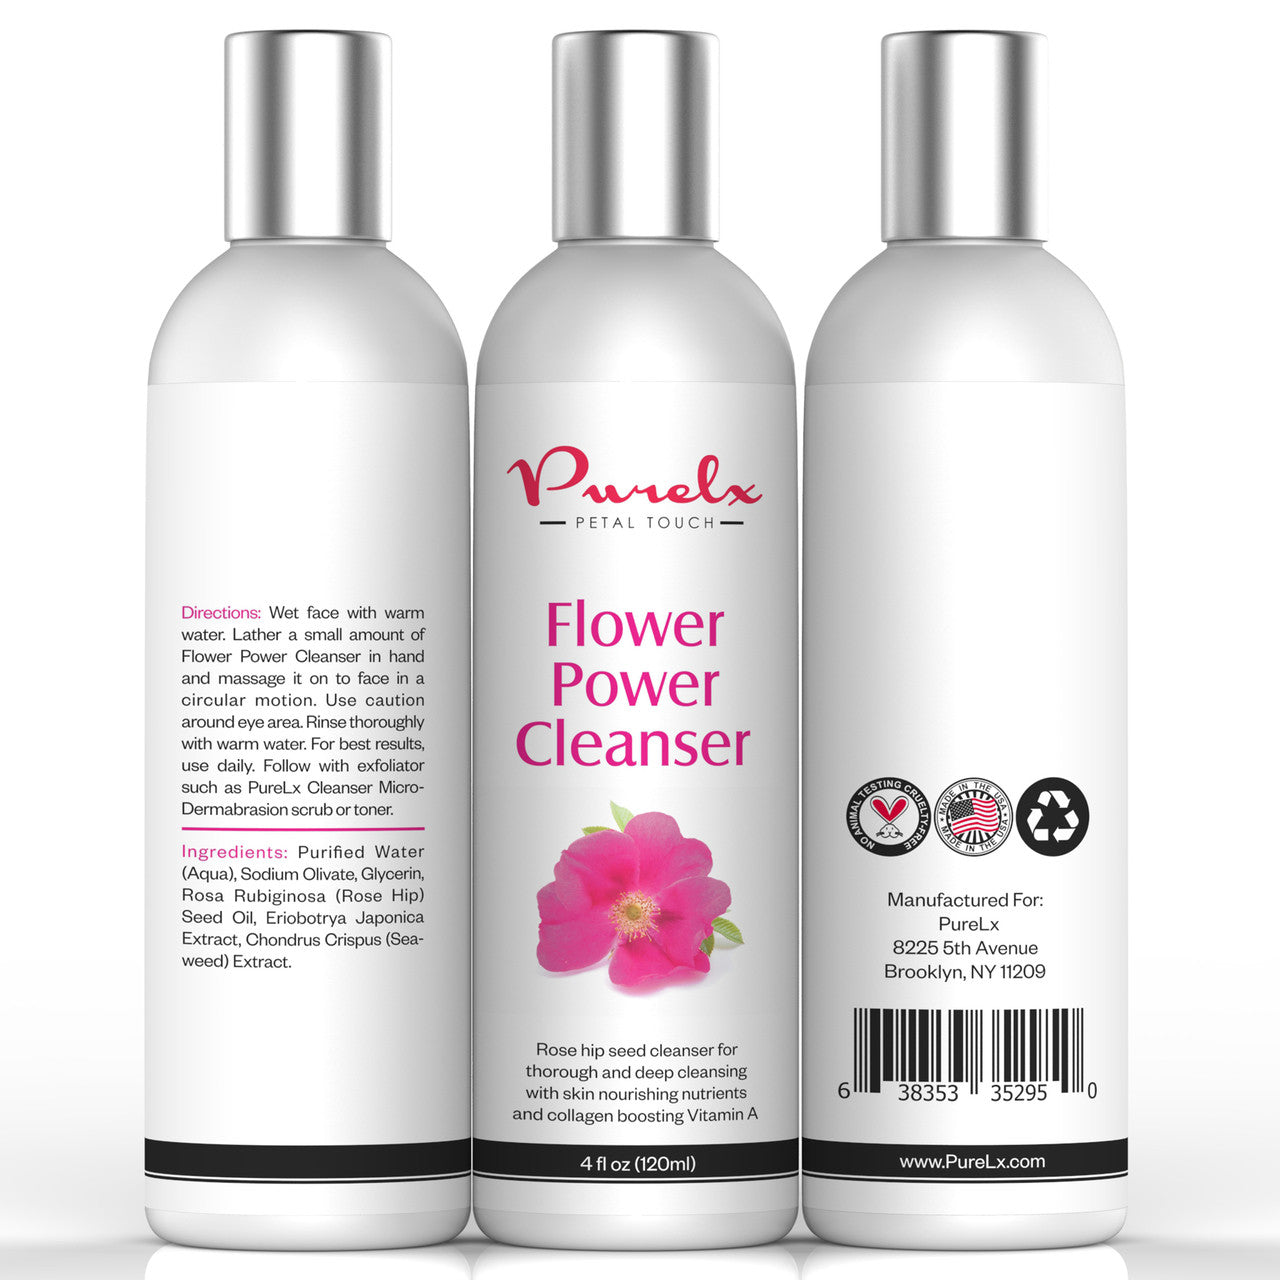 Flower Power Cleanser - Rose Hip Seed Oil Cleanser Rich in Vitamins A, C, E & F!